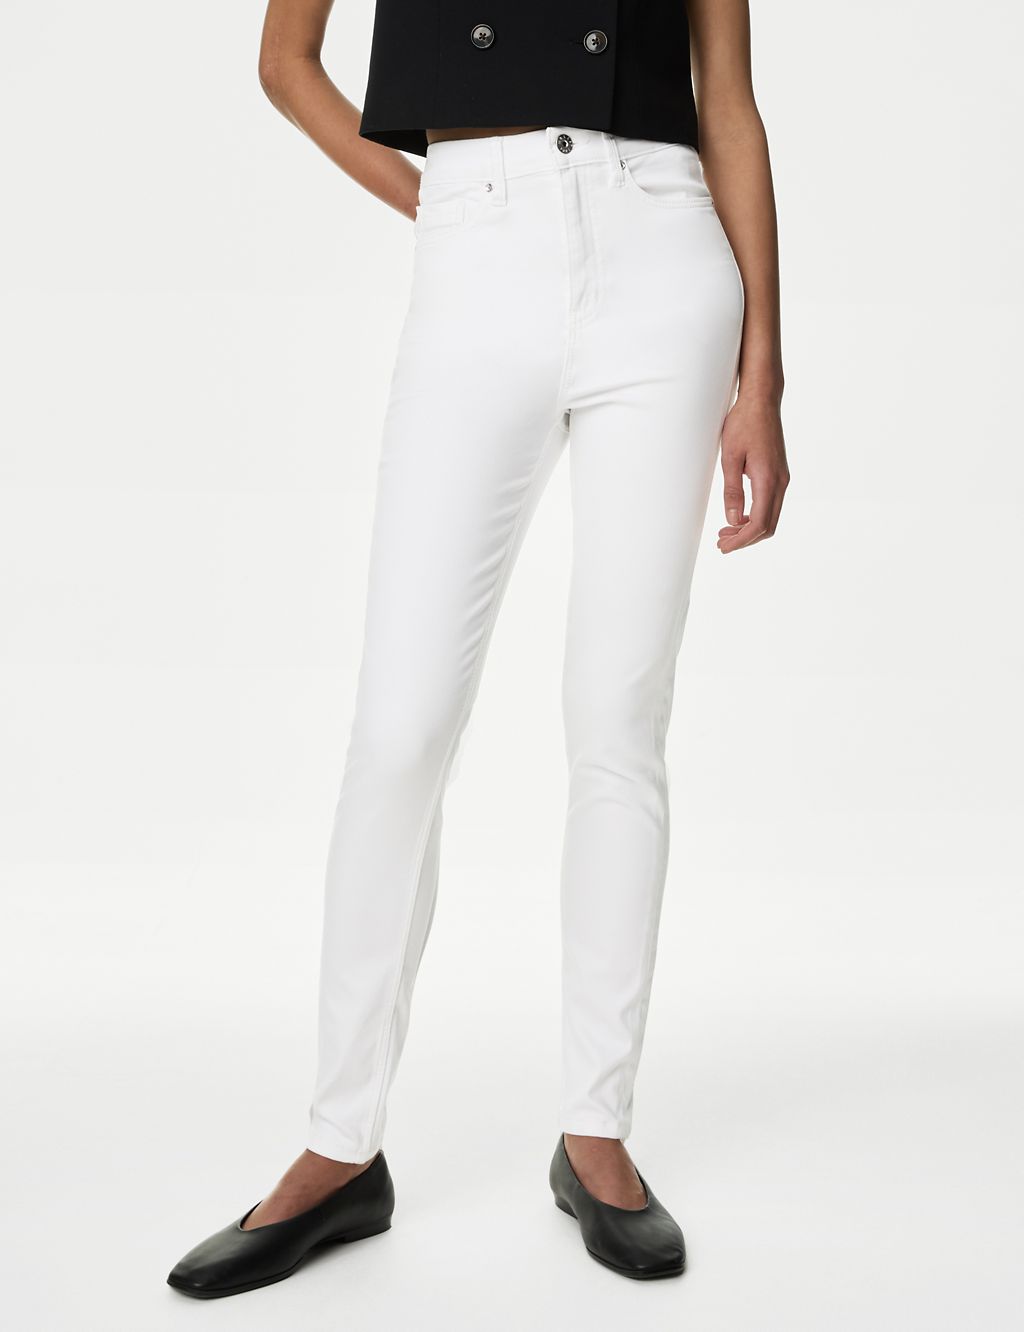 Ivy Supersoft High Waisted Skinny Jeans 4 of 6